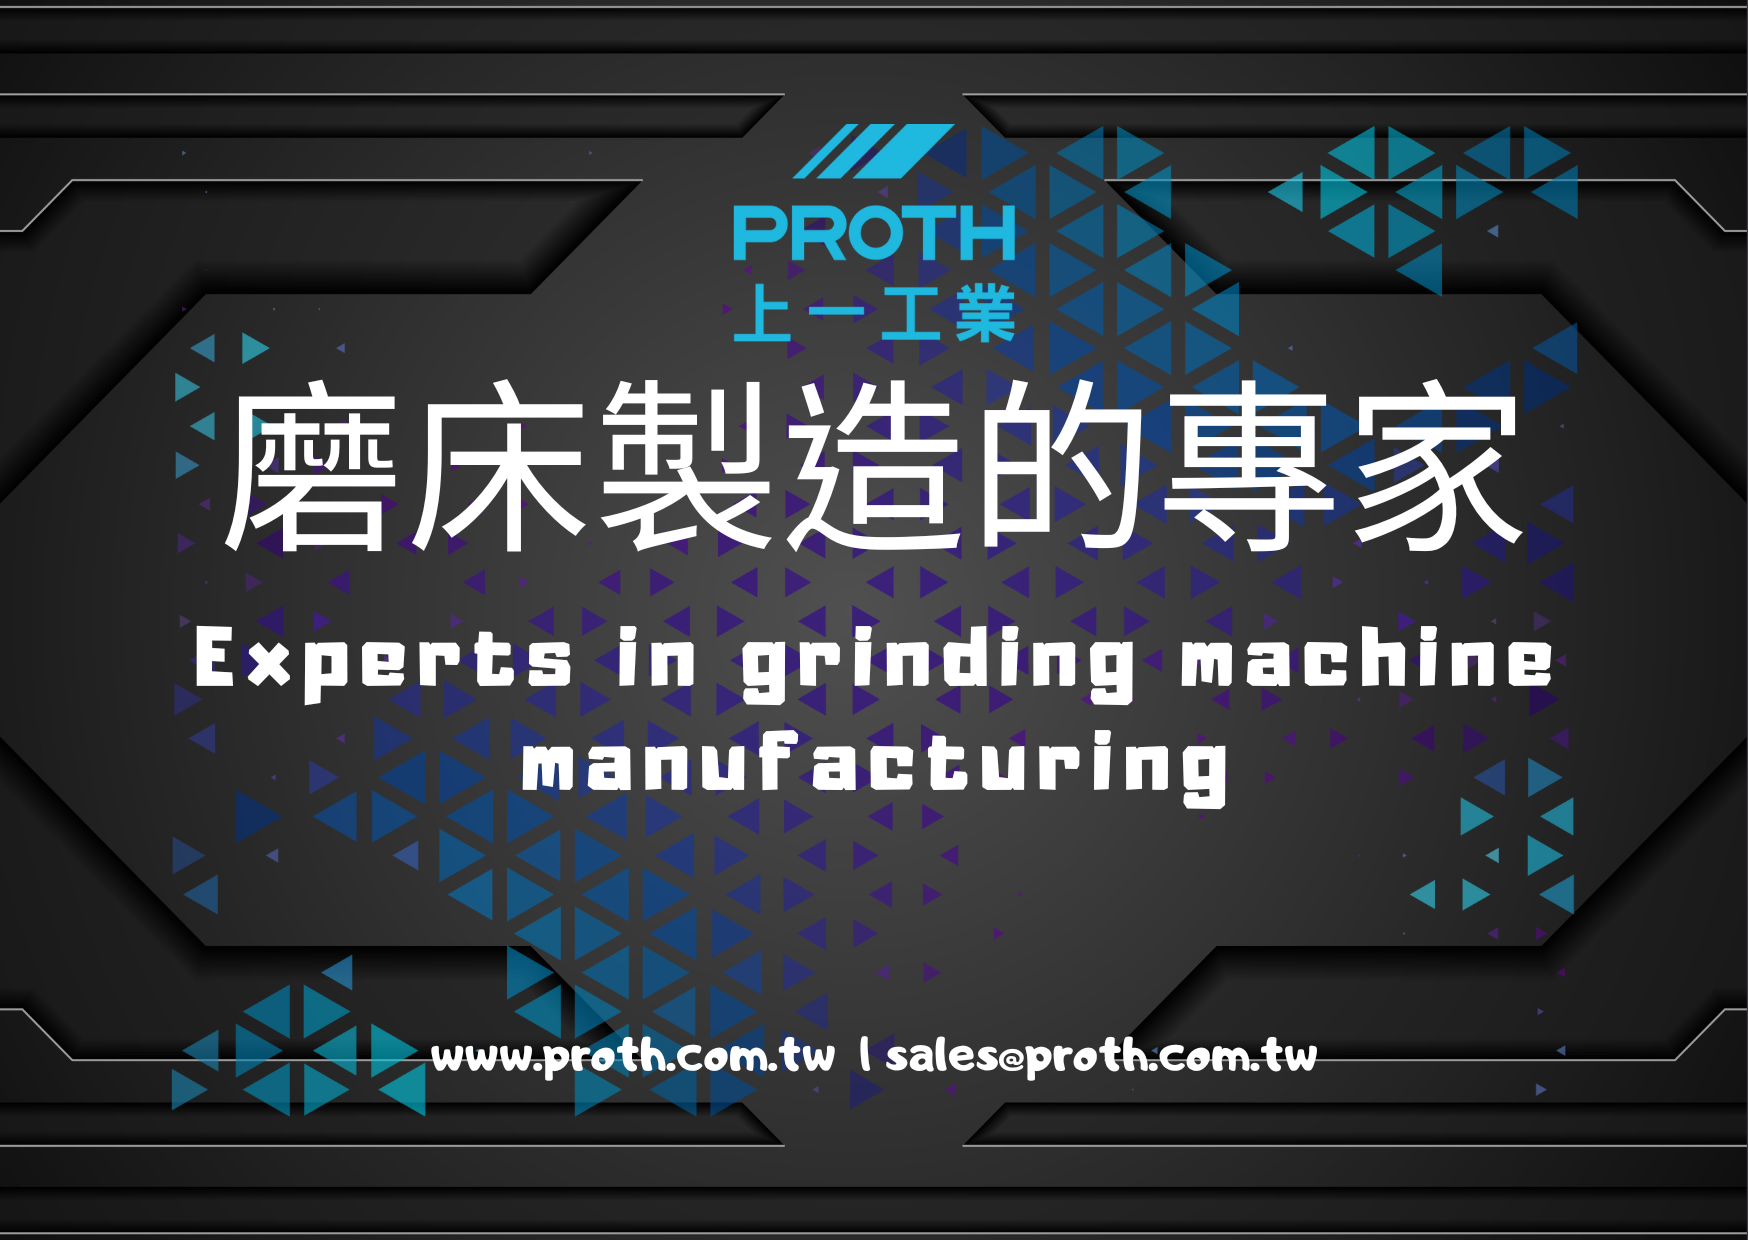 PROTH - Experts in grinder manufacturing